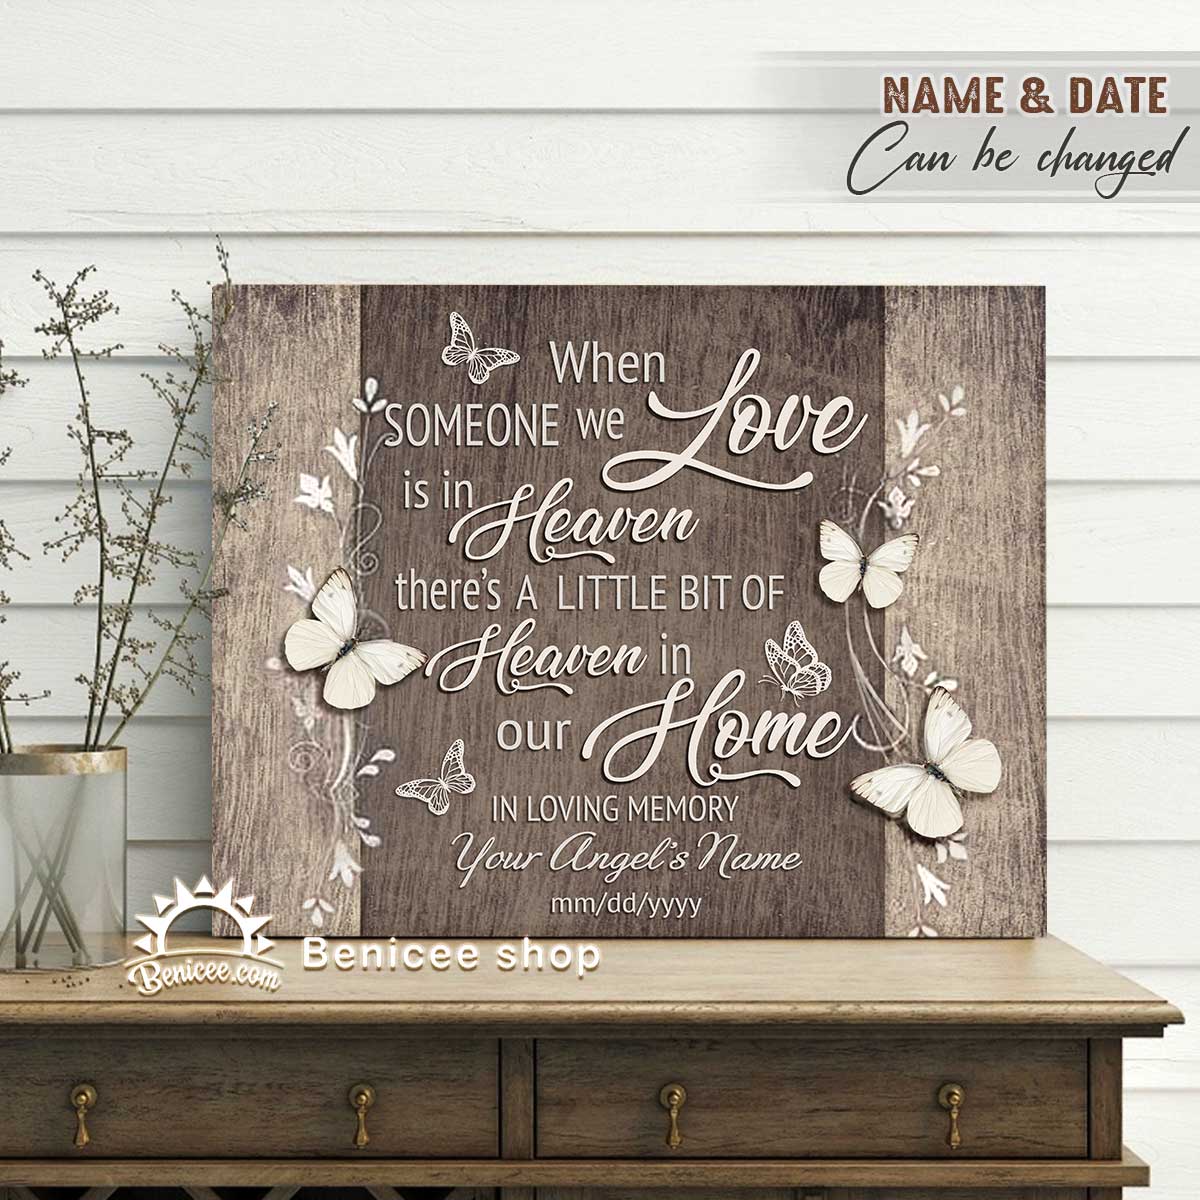 memorial-gift-canvas-heaven-in-our-home-gray-wood-top-3-benicee